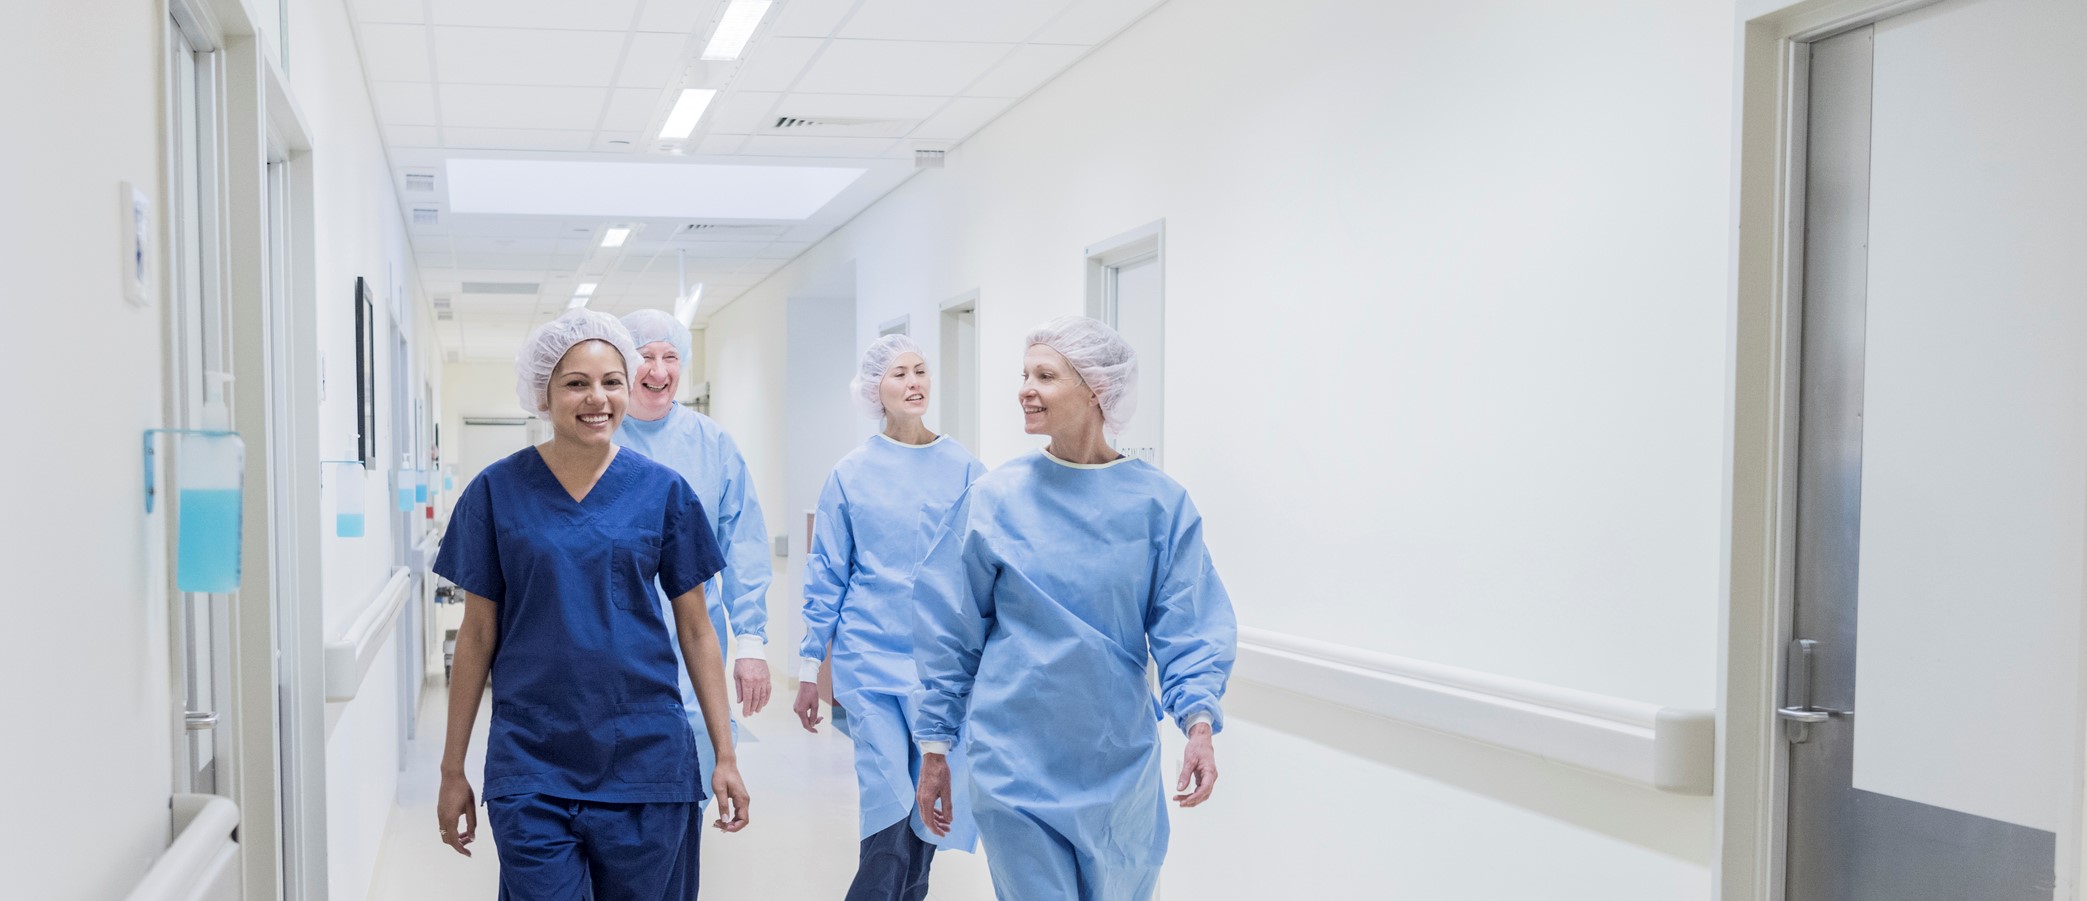 Surgical team walking down hospital corridor, front view